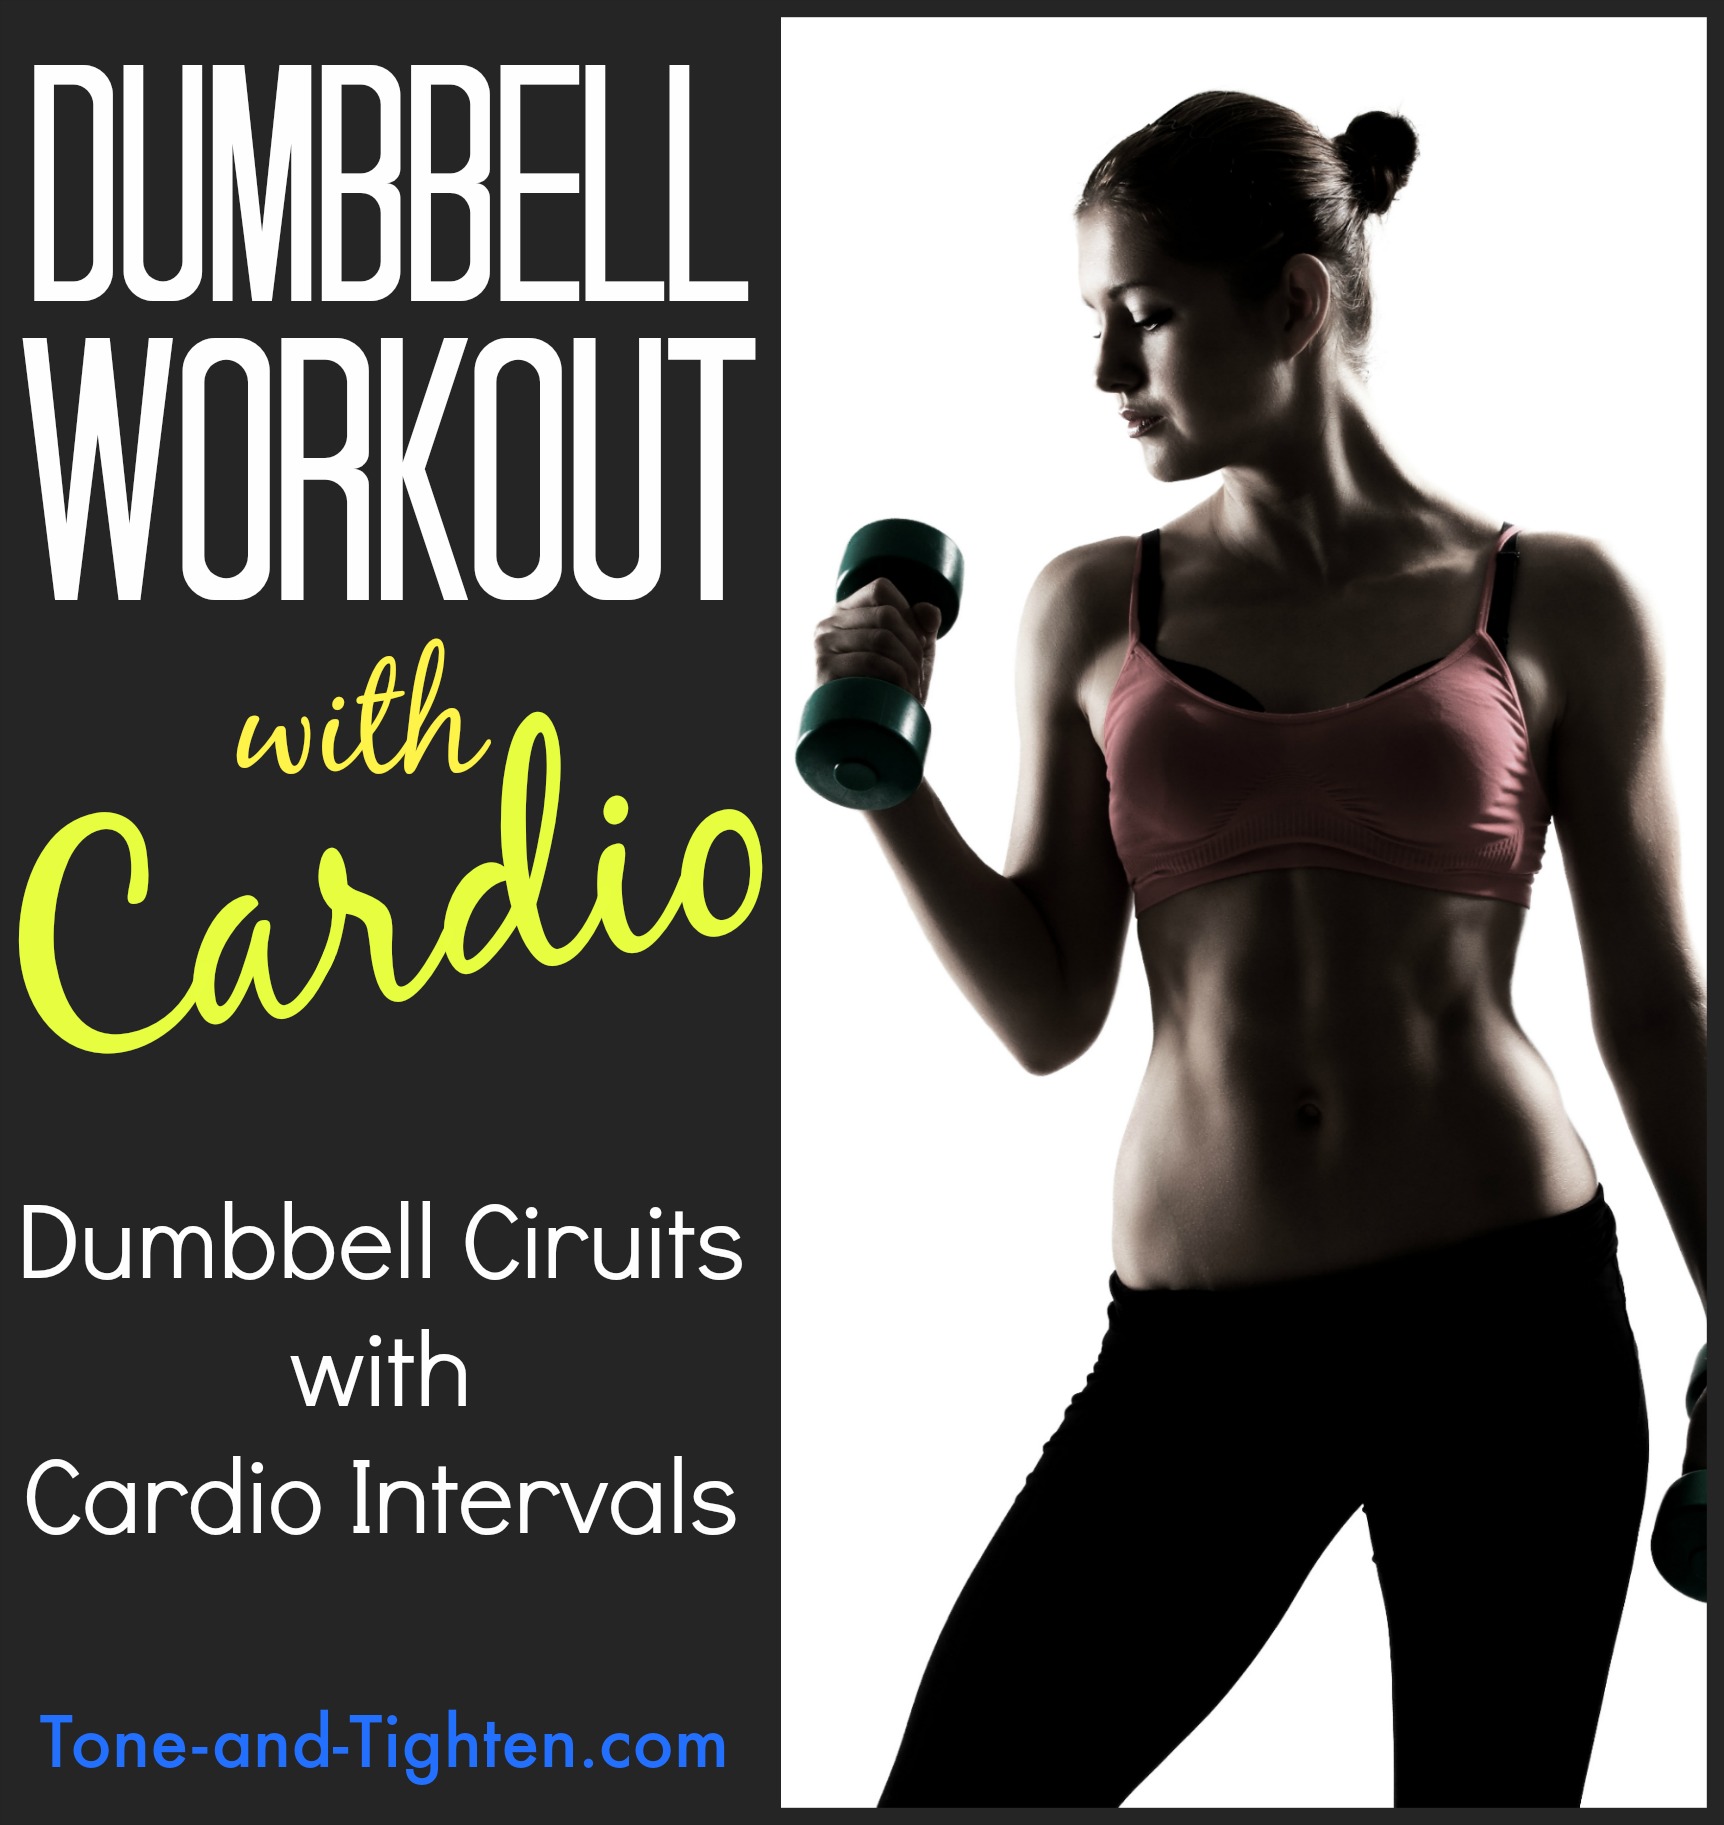 Dumbbell and Cardio Workout – A Real Calorie Burner!